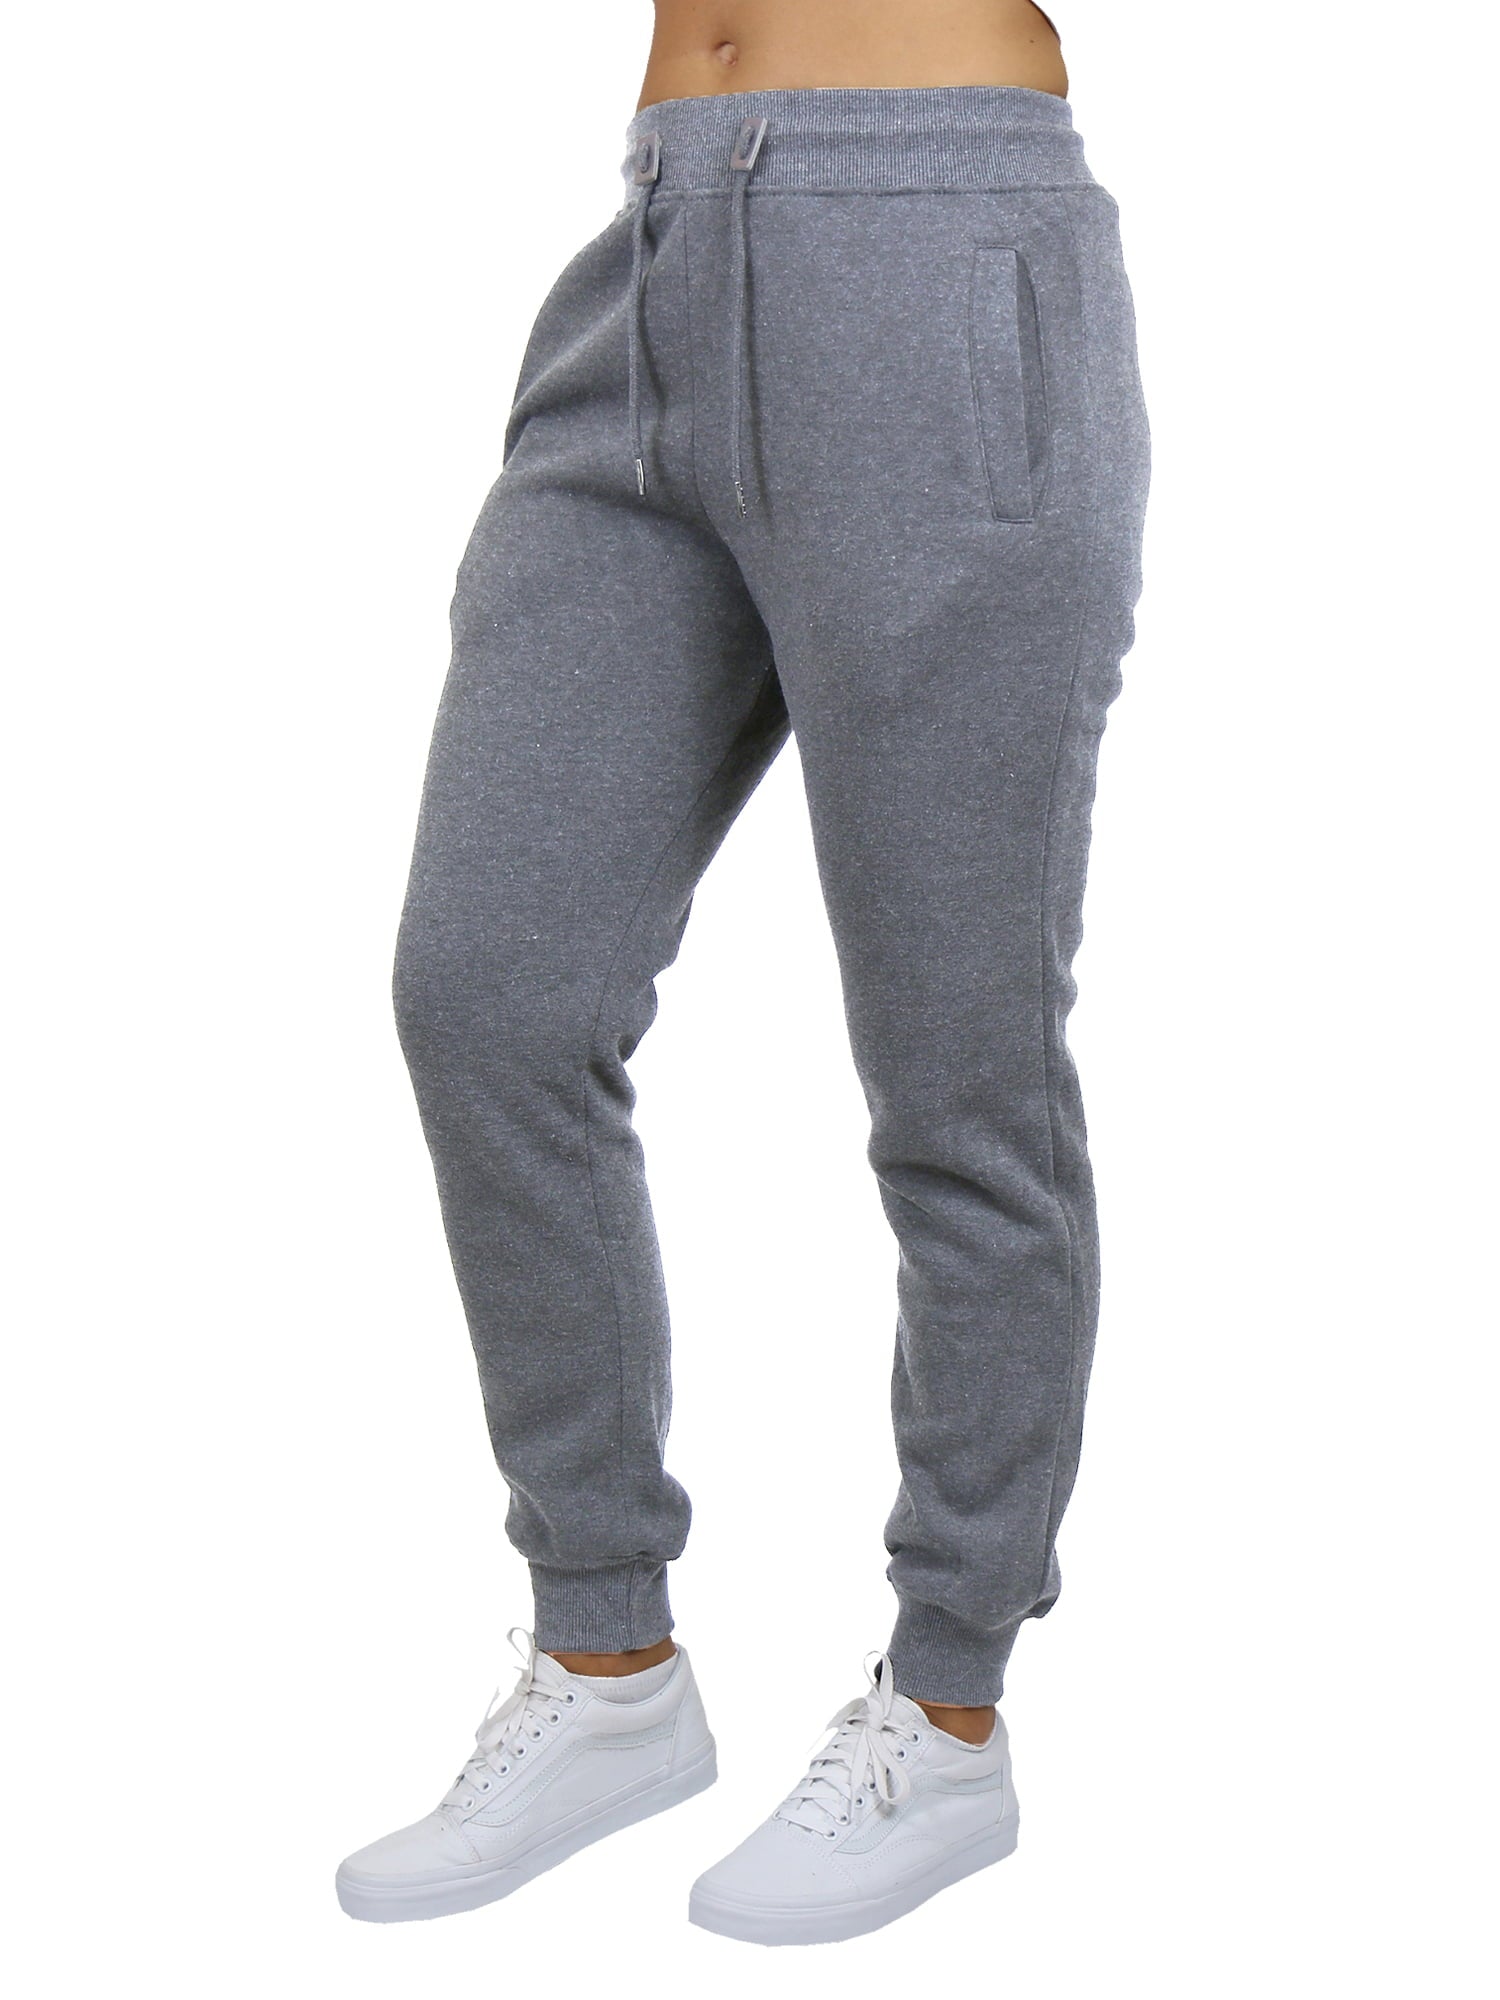 What Is Pile Lined Sweatpants? – solowomen